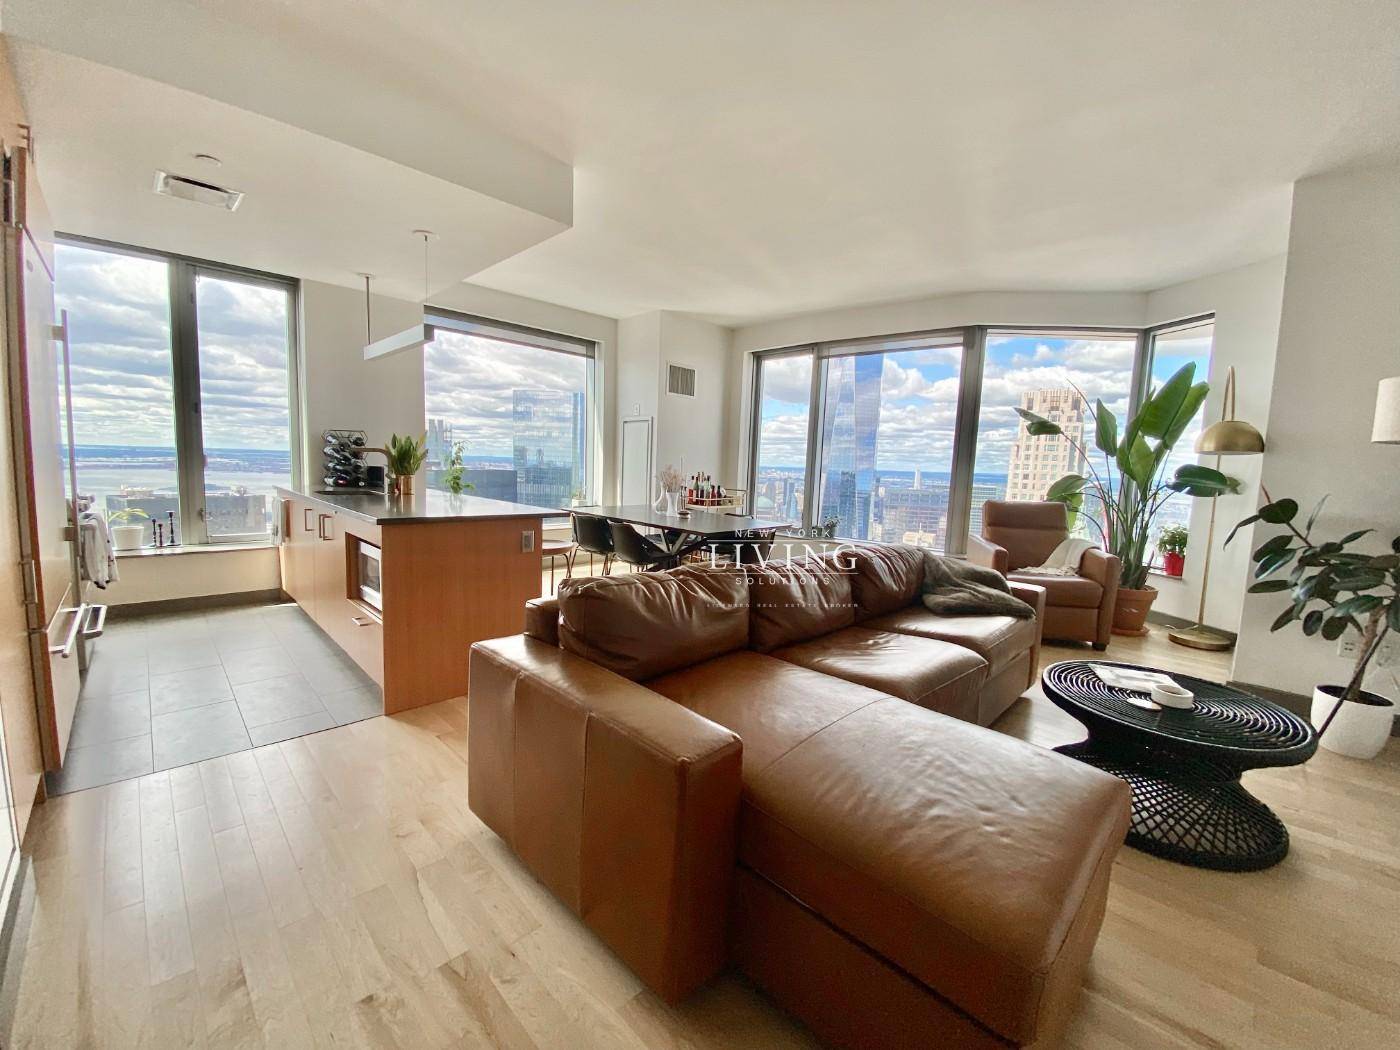 Brand New to market Big Corner 2 bedroom 2 bath apartment on the 73rd floor with amazing views of the Statue of Liberty, the Freedom Tower, Manhattan Skyline, and the ...